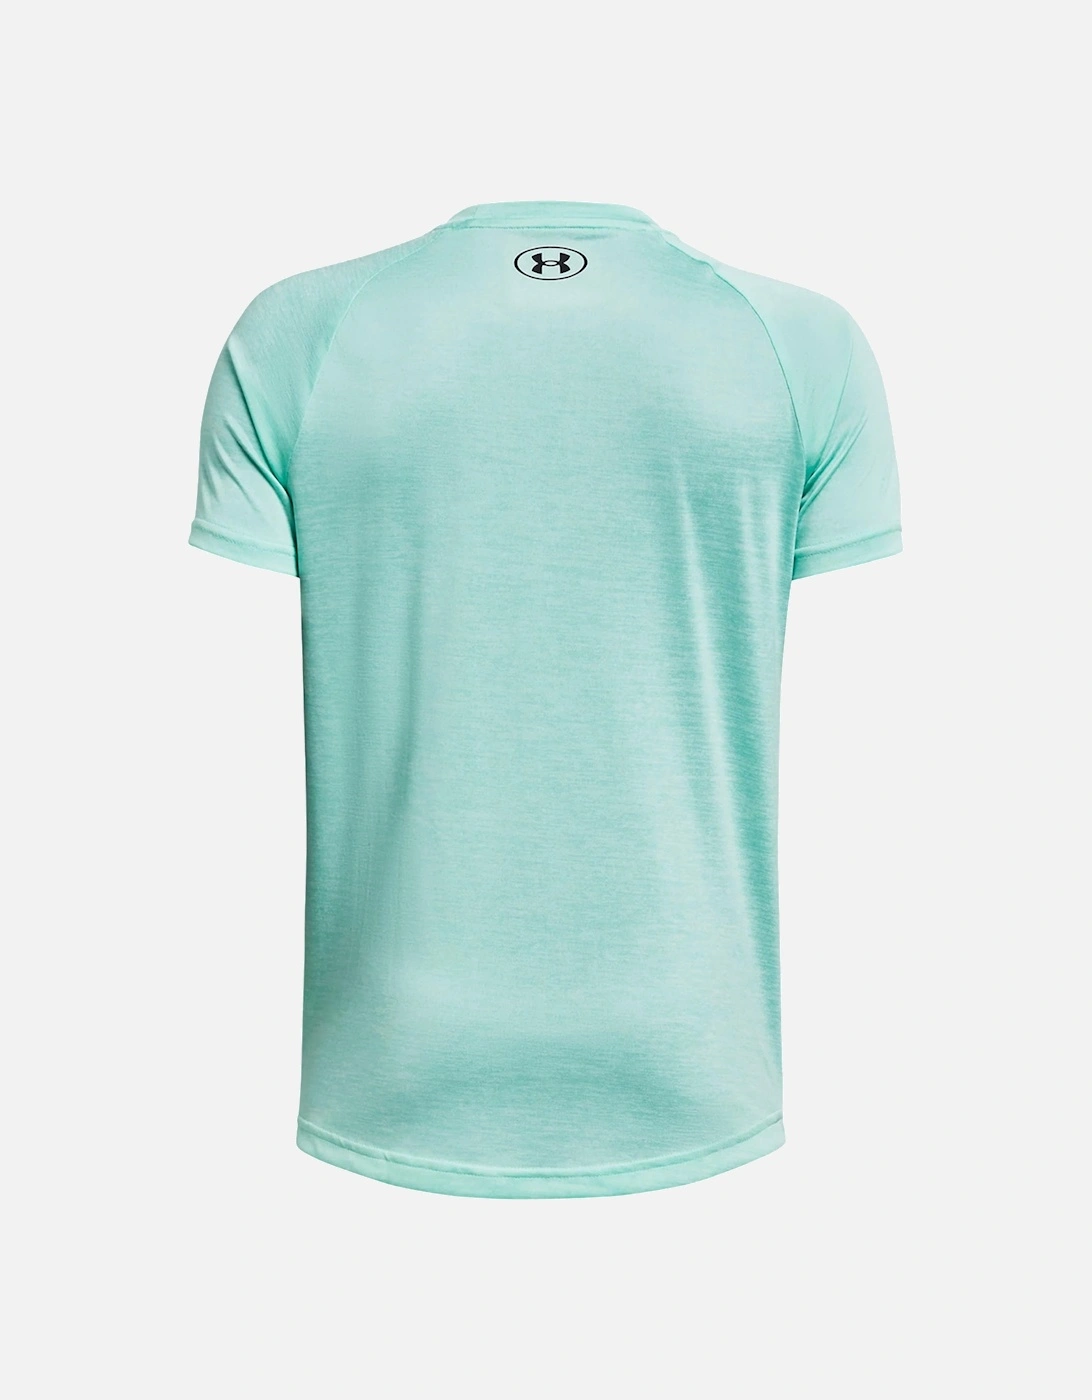 Youths Tech T-Shirt 2.0 (Turquoise)